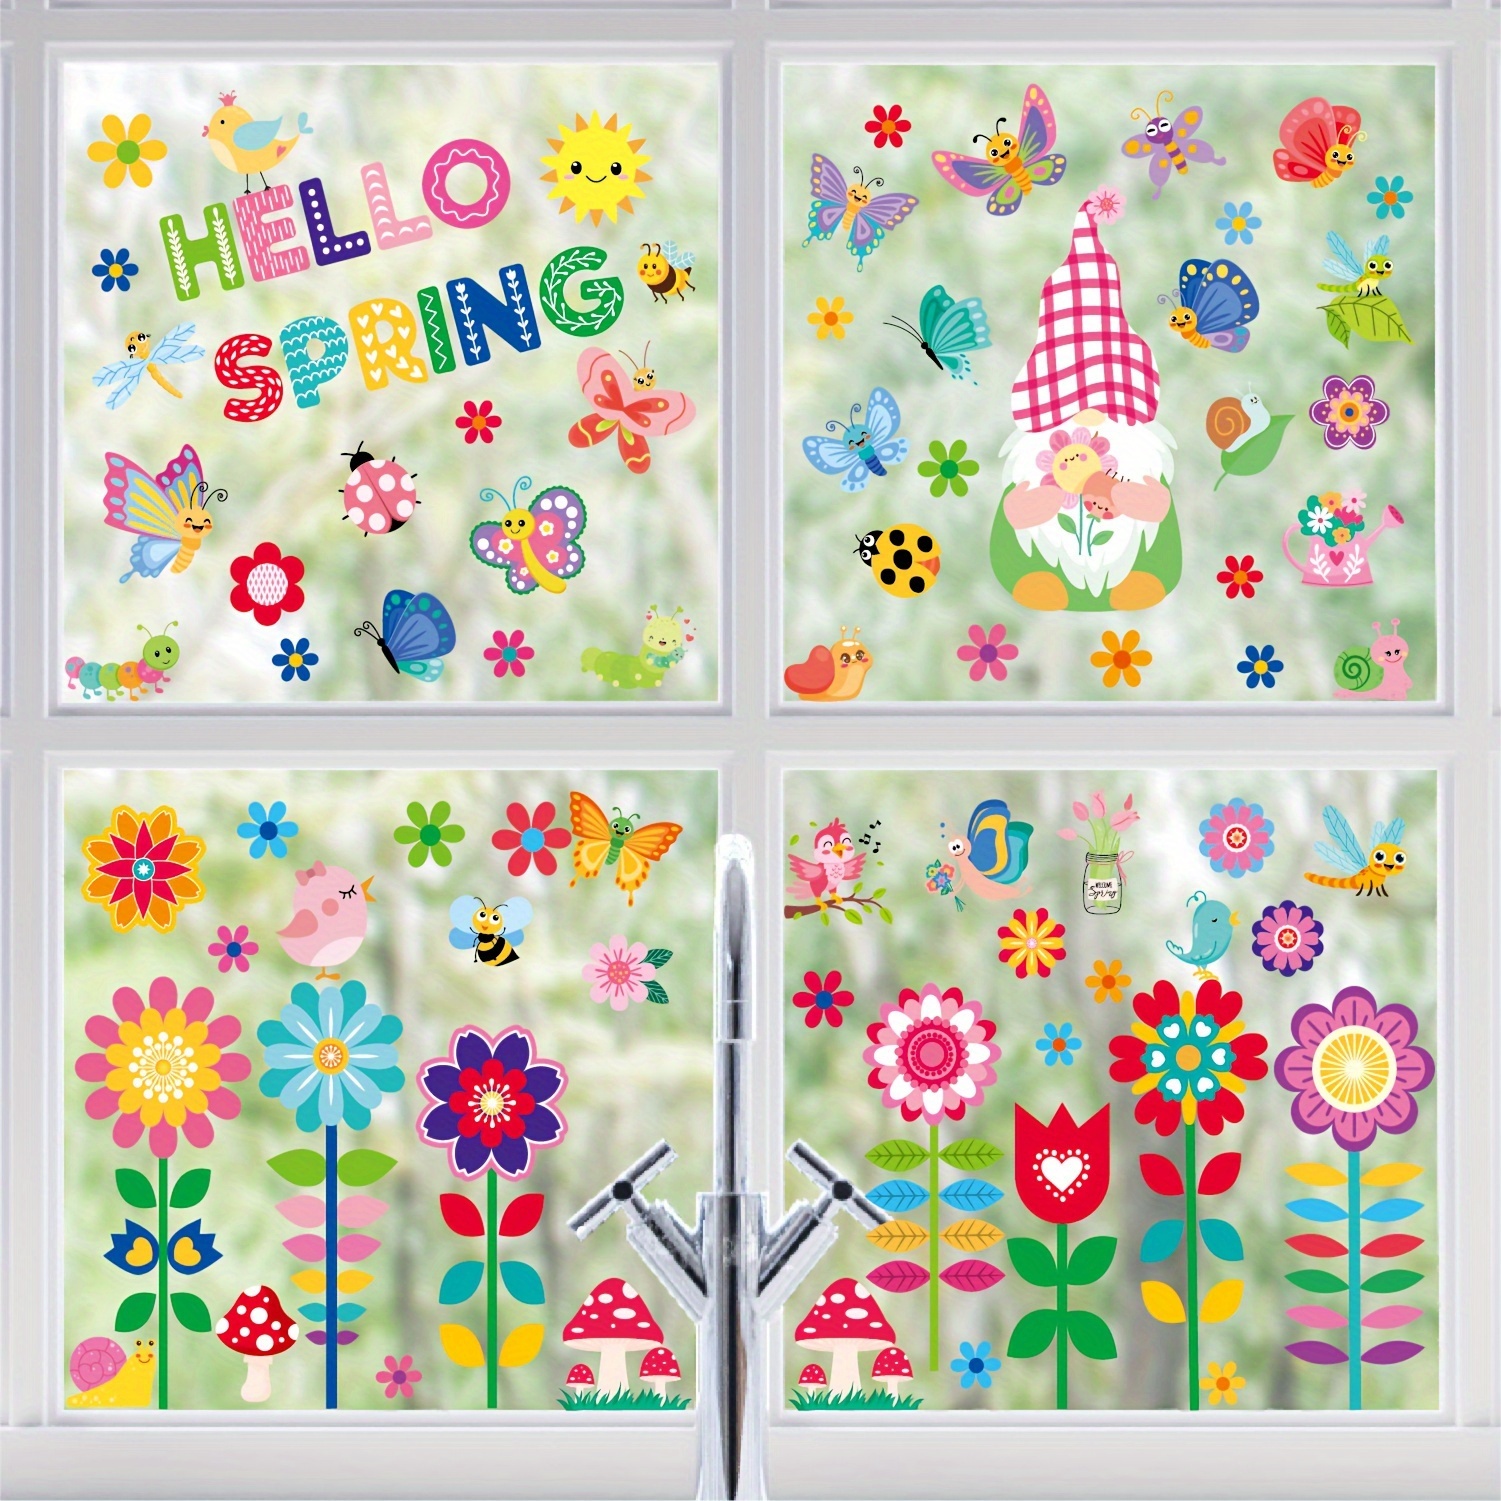 9 Sheet Hello Spring Window Stickers Decorations Spring Window Clings Flowers Butterflies Bees Birds Double-Sided Anti-collision PVC Window Decals